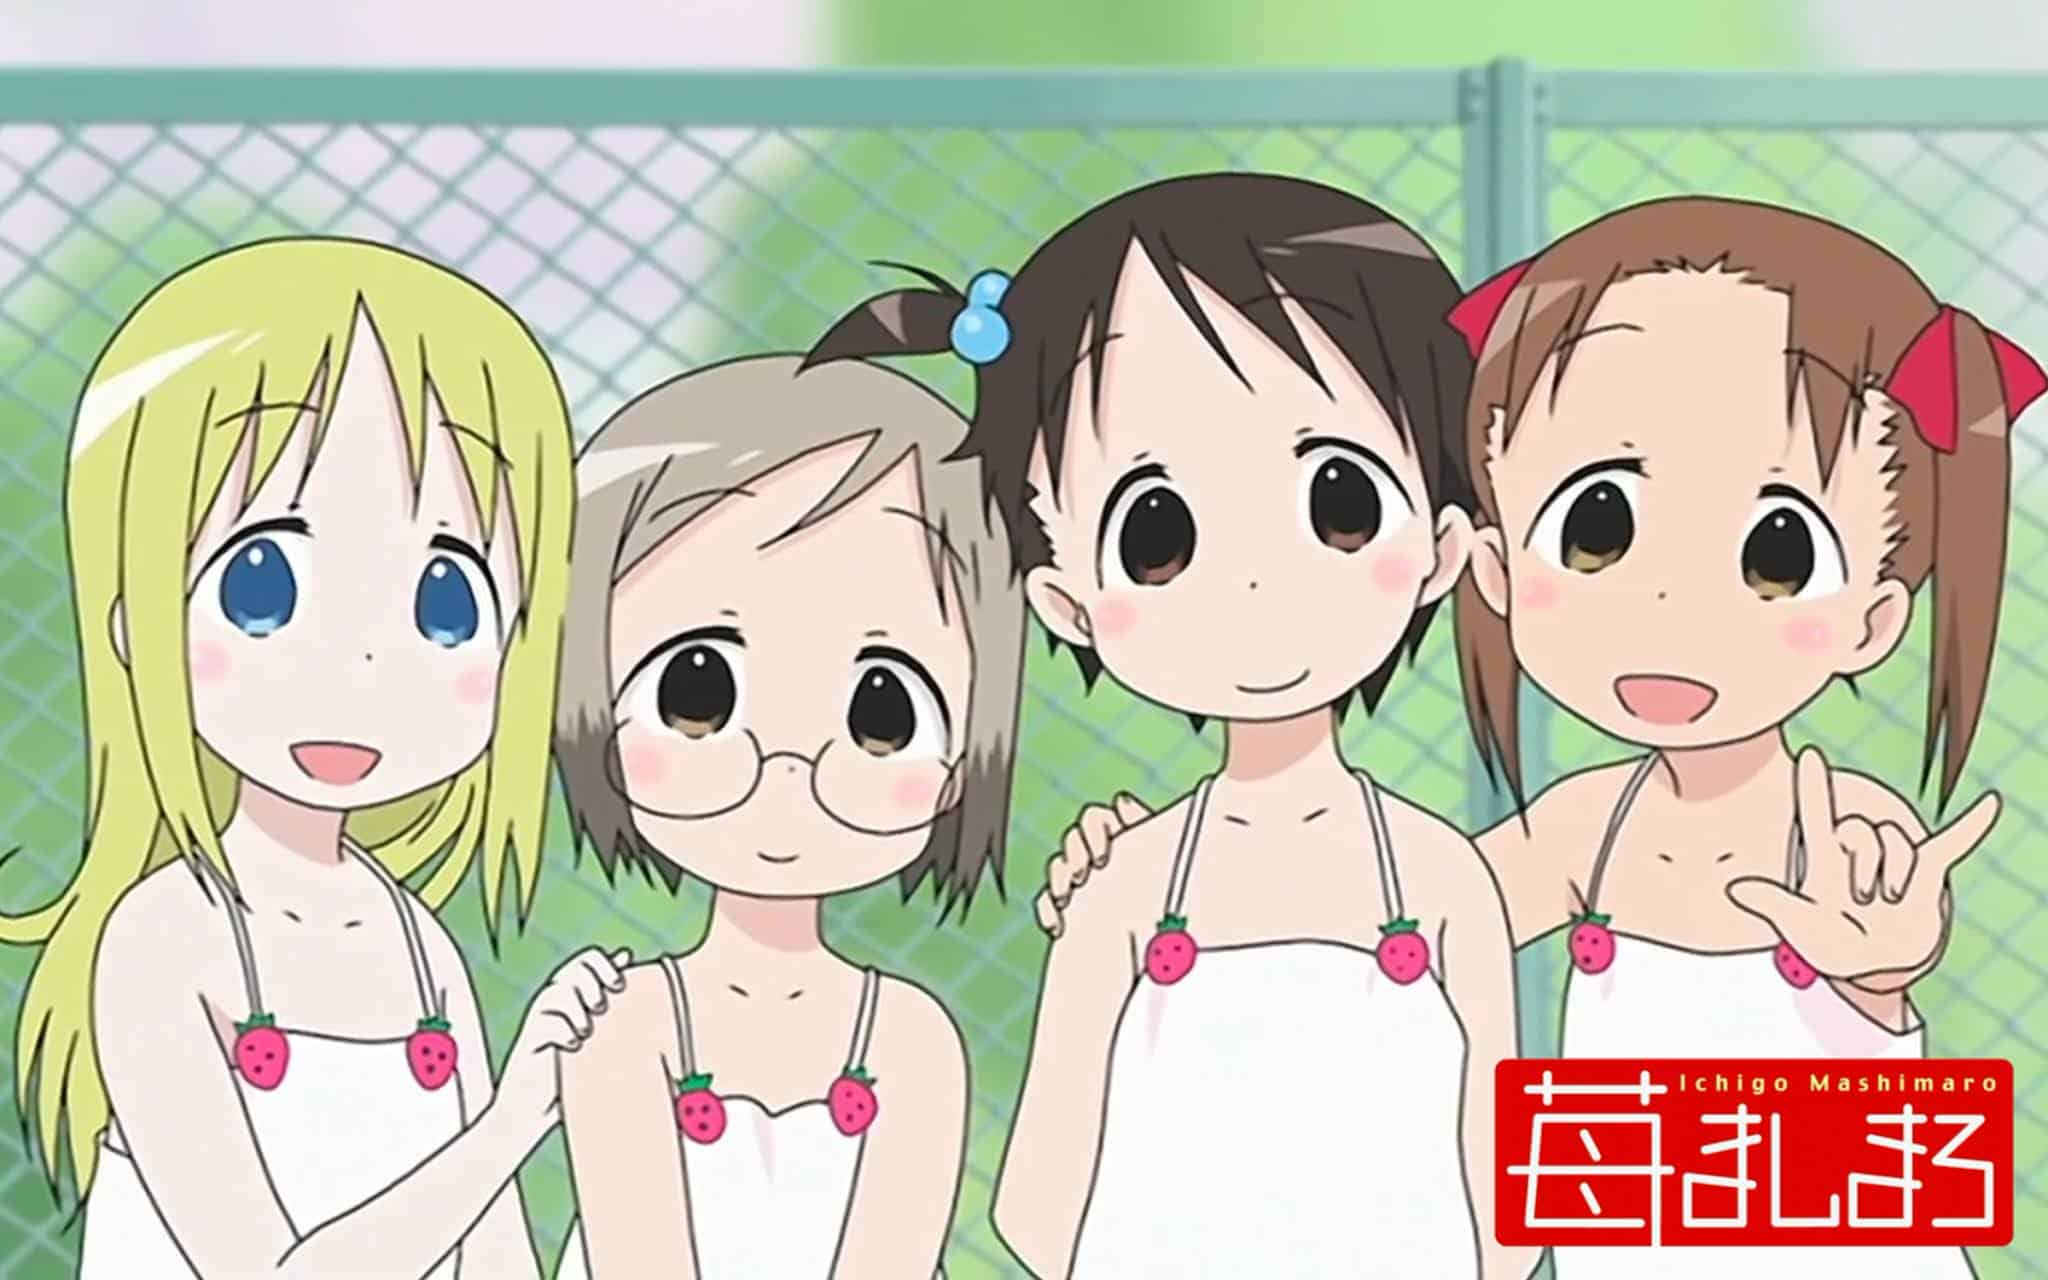 The four main characters from Ichigo Mashimaro smiling for the camera.